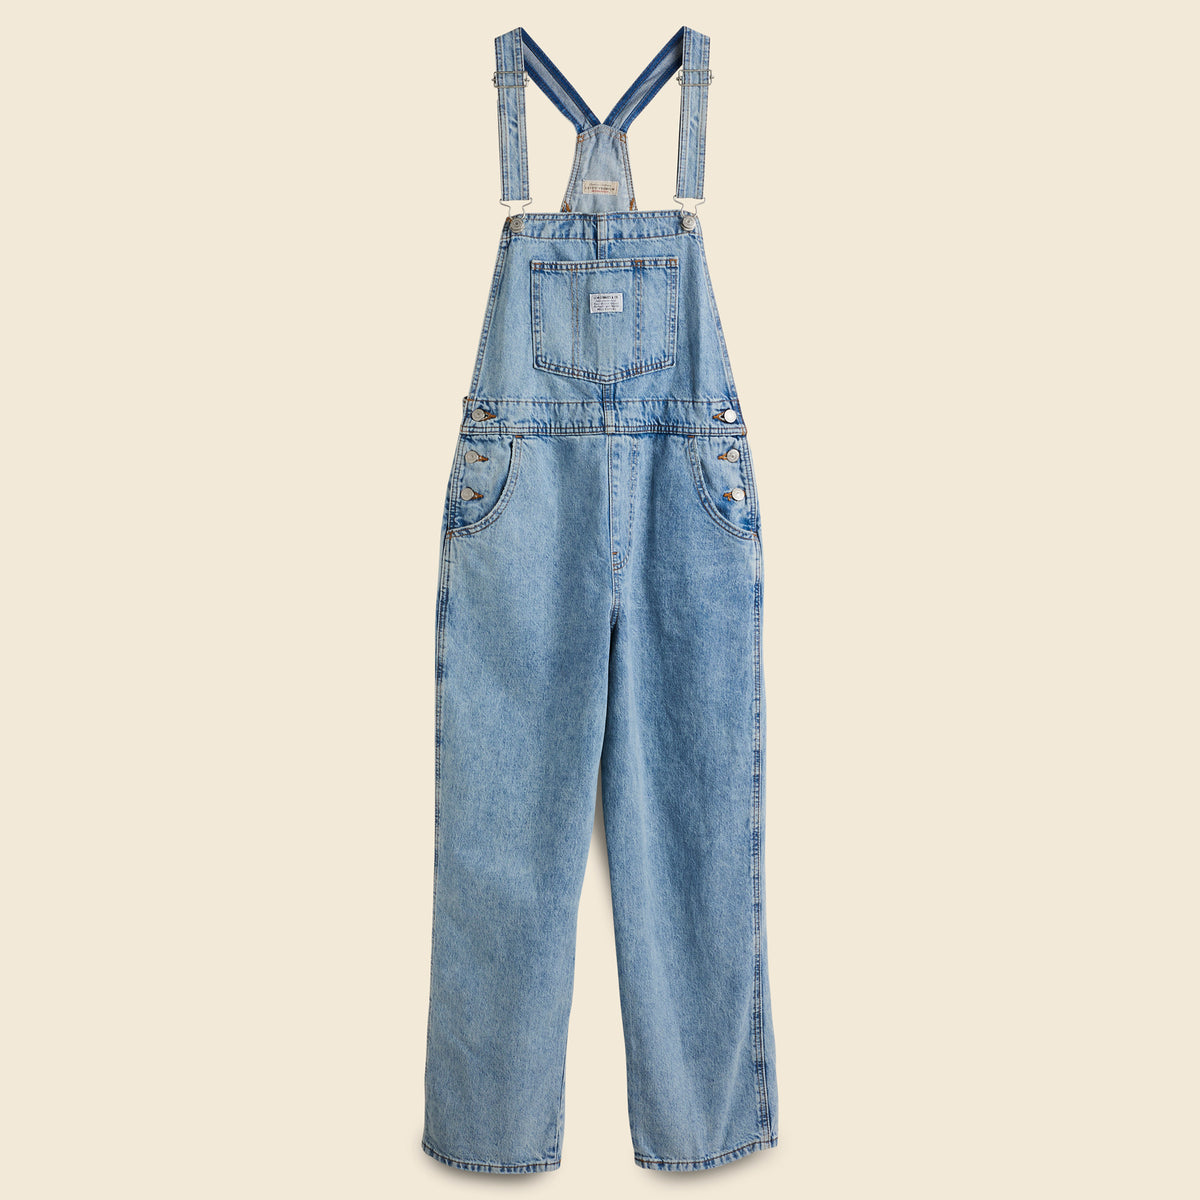 Vintage Overall - No Stone Unturned